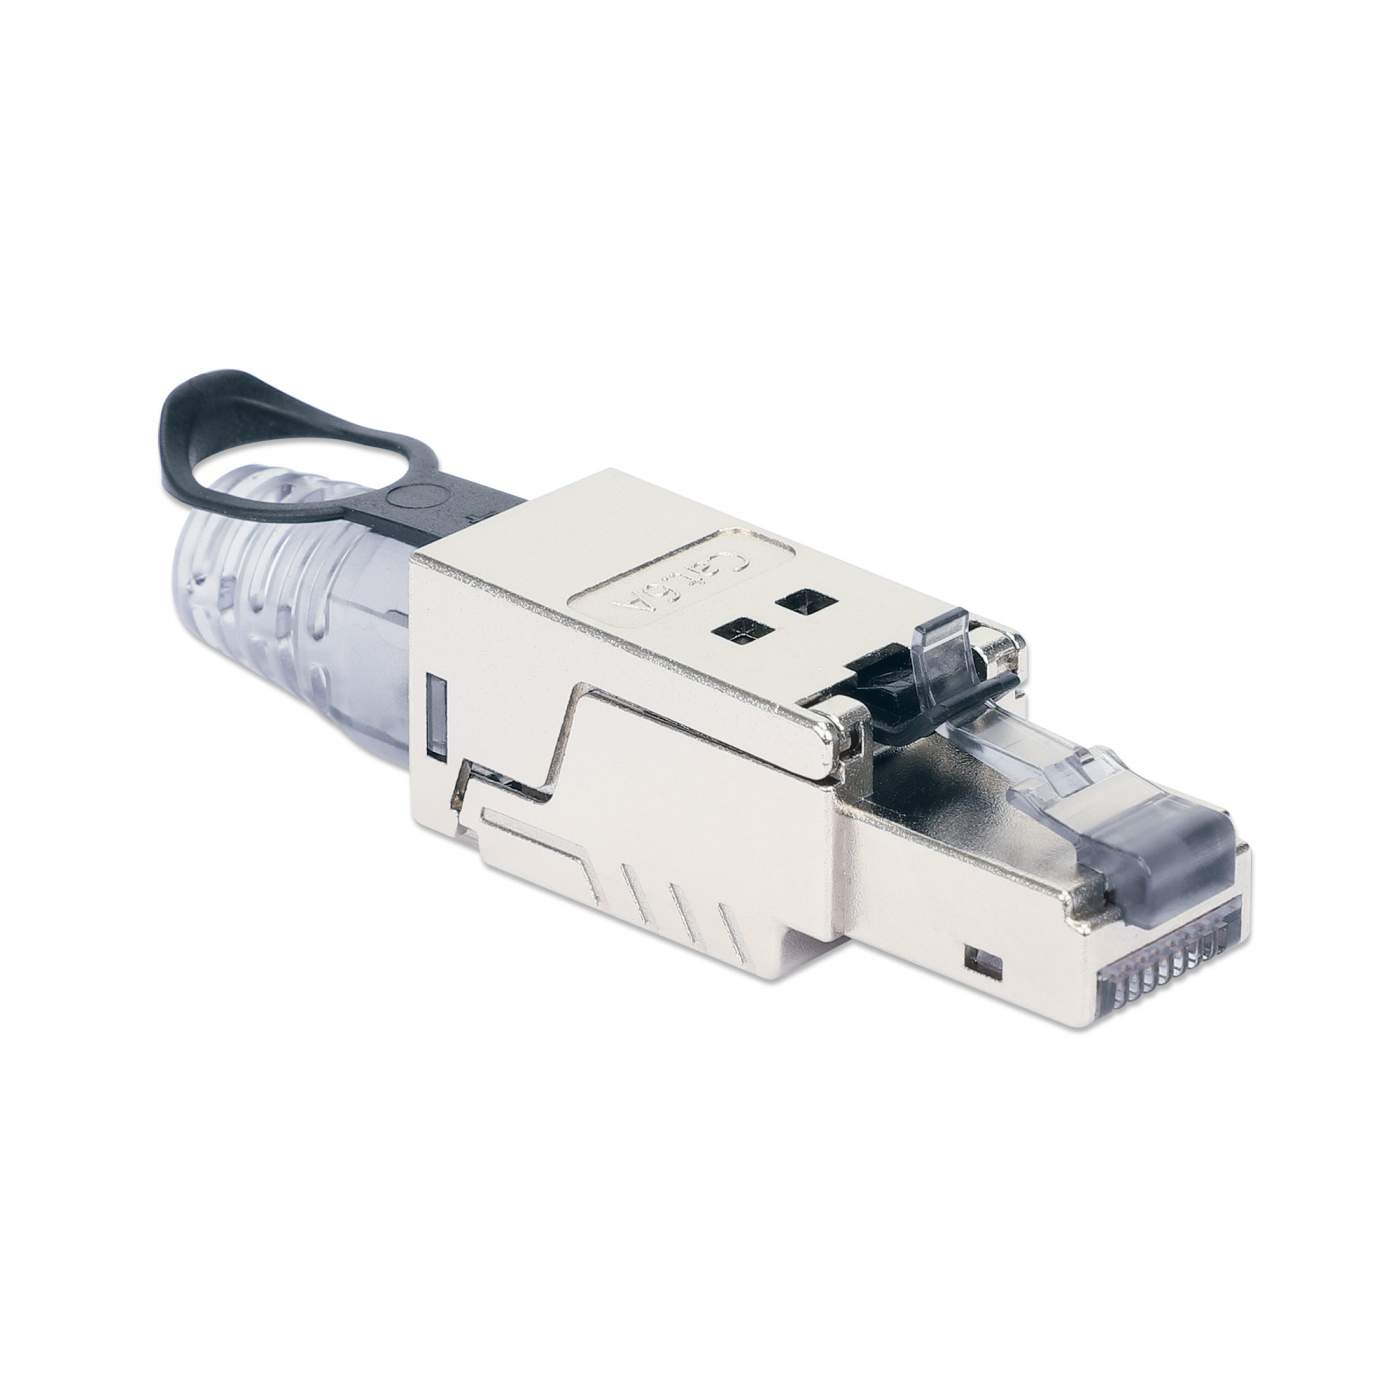 Cat6a 10G Shielded Toolless RJ45 Modular Field Termination Plug with Pull-ring Release Image 2